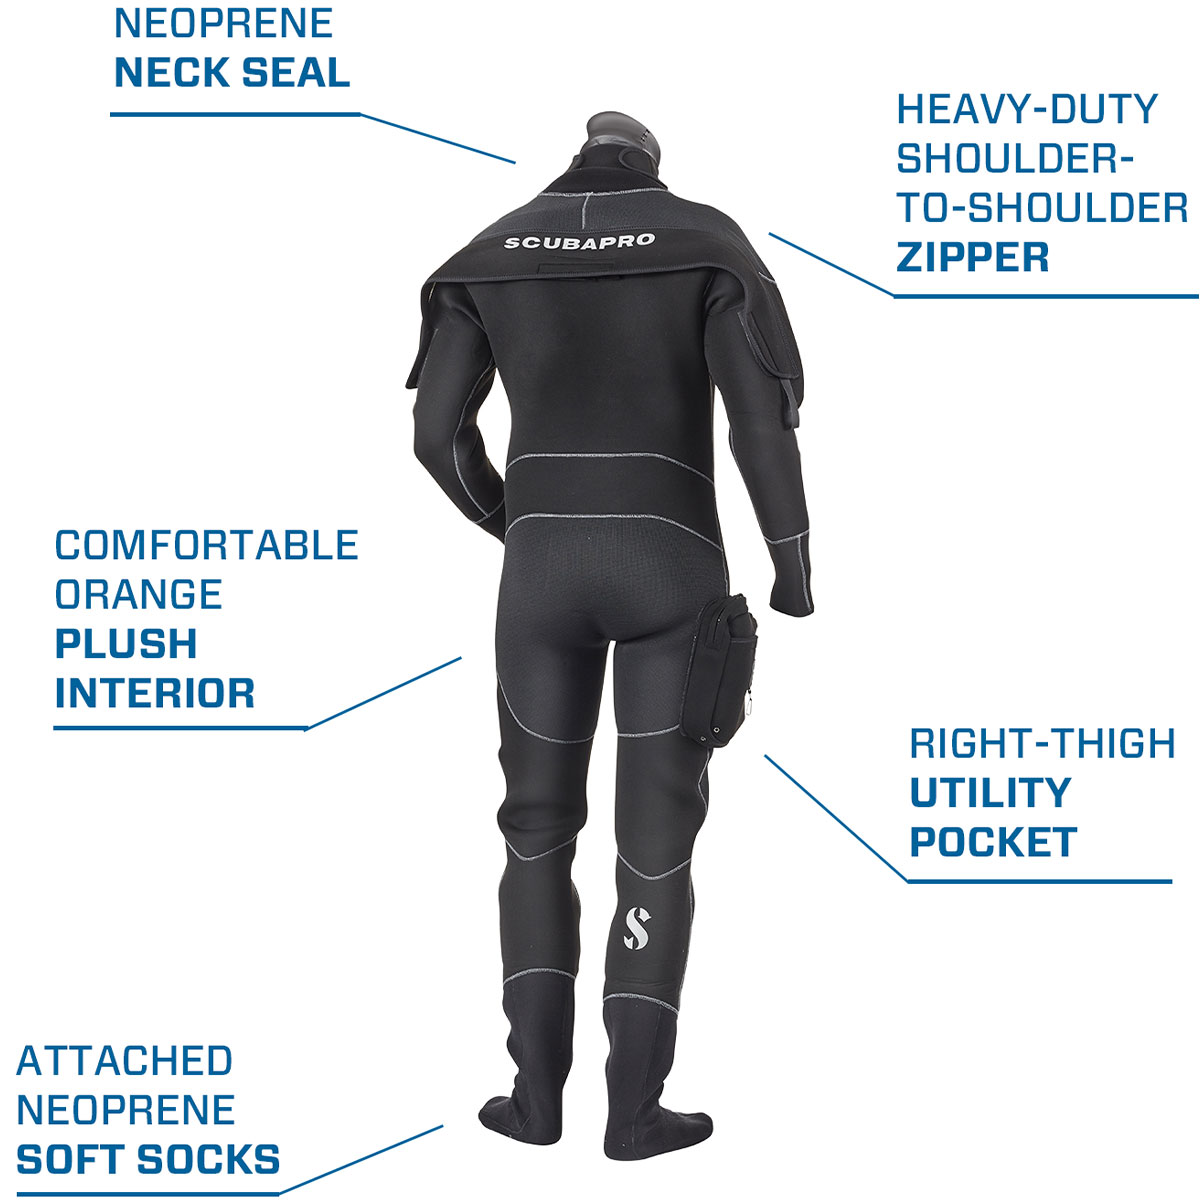 LO3 1 Scubapro Everdry 4 Dry Suit woman size XL new yuly 2019 